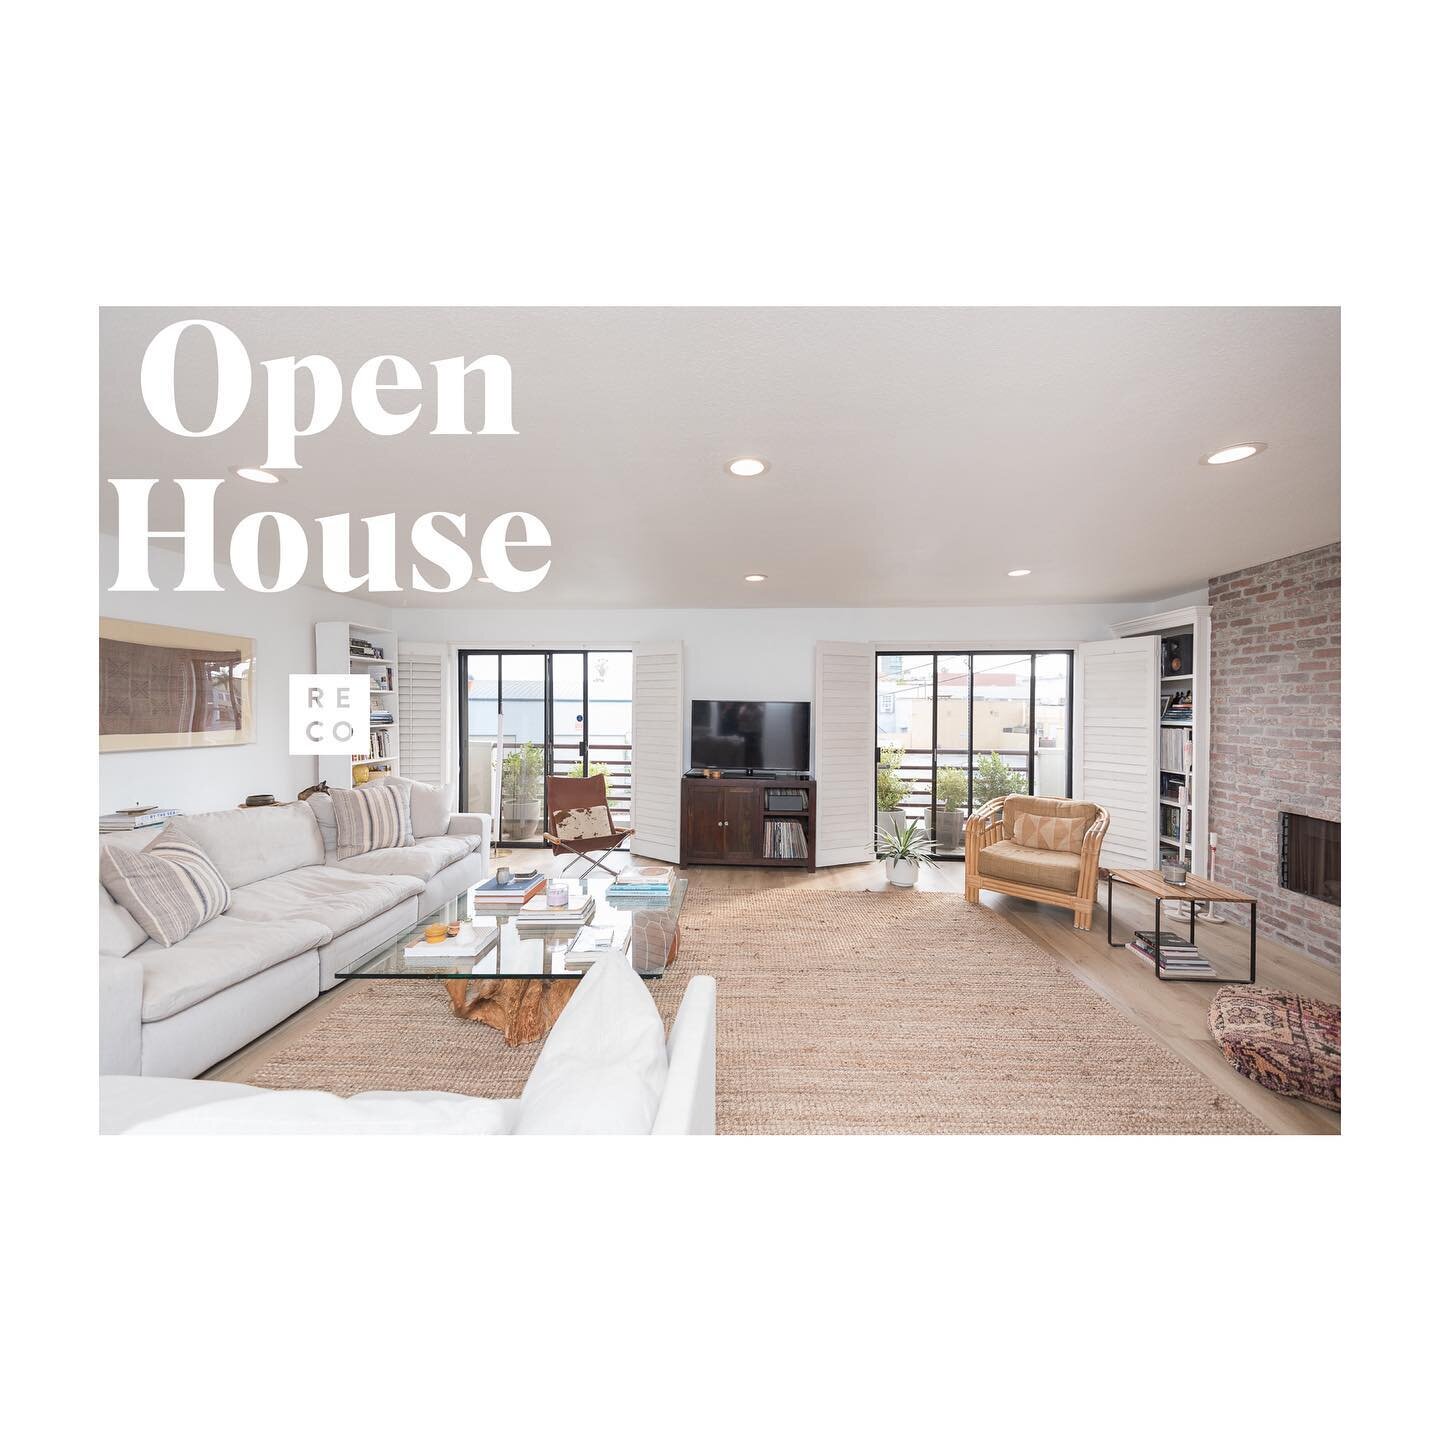 OPEN HOUSE! 

SAT 7/10 1-4pm

1216 Saltair Ave Unit 101 
#WestLA 90025

Bright and breezy 3bed + 2bath second floor condo with no shared walls. Fully remodeled kitchen with stainless steel appliances, quartz counters and custom cabinetry. 1574 sf.

L